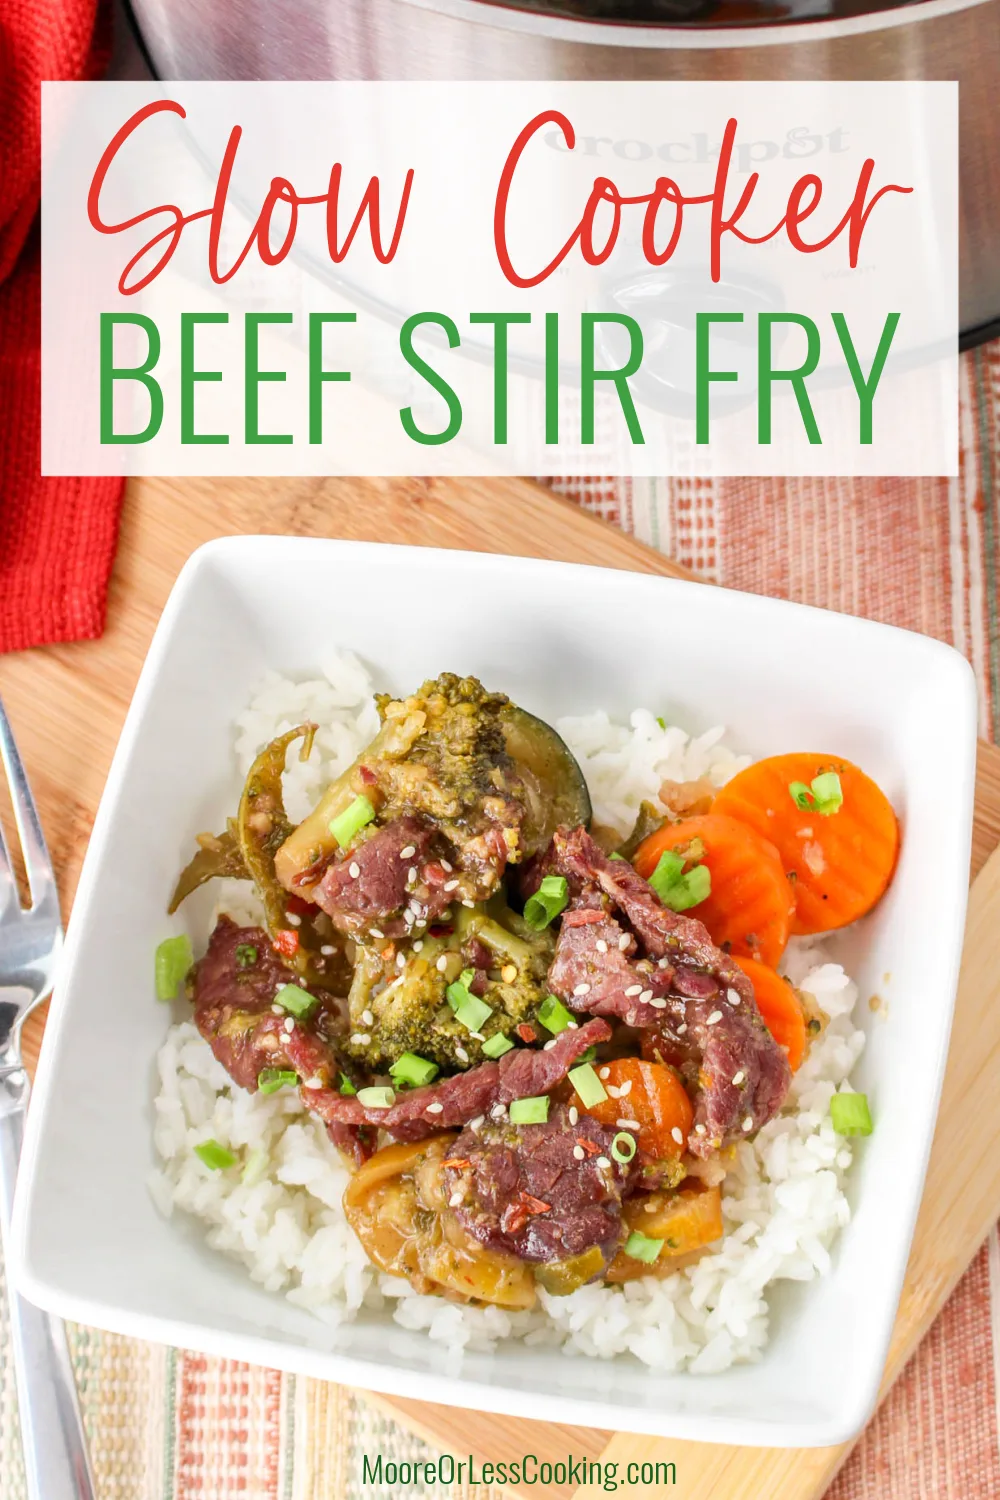 This easy Slow Cooker Beef Stir Fry is the perfect weeknight dinner that's infused with soy sauce, garlic, sesame oil, ginger, and veggies that you can serve over rice or your favorite noodles. It's a dump-and-go one-pot meal that's always a hit! via @Mooreorlesscook